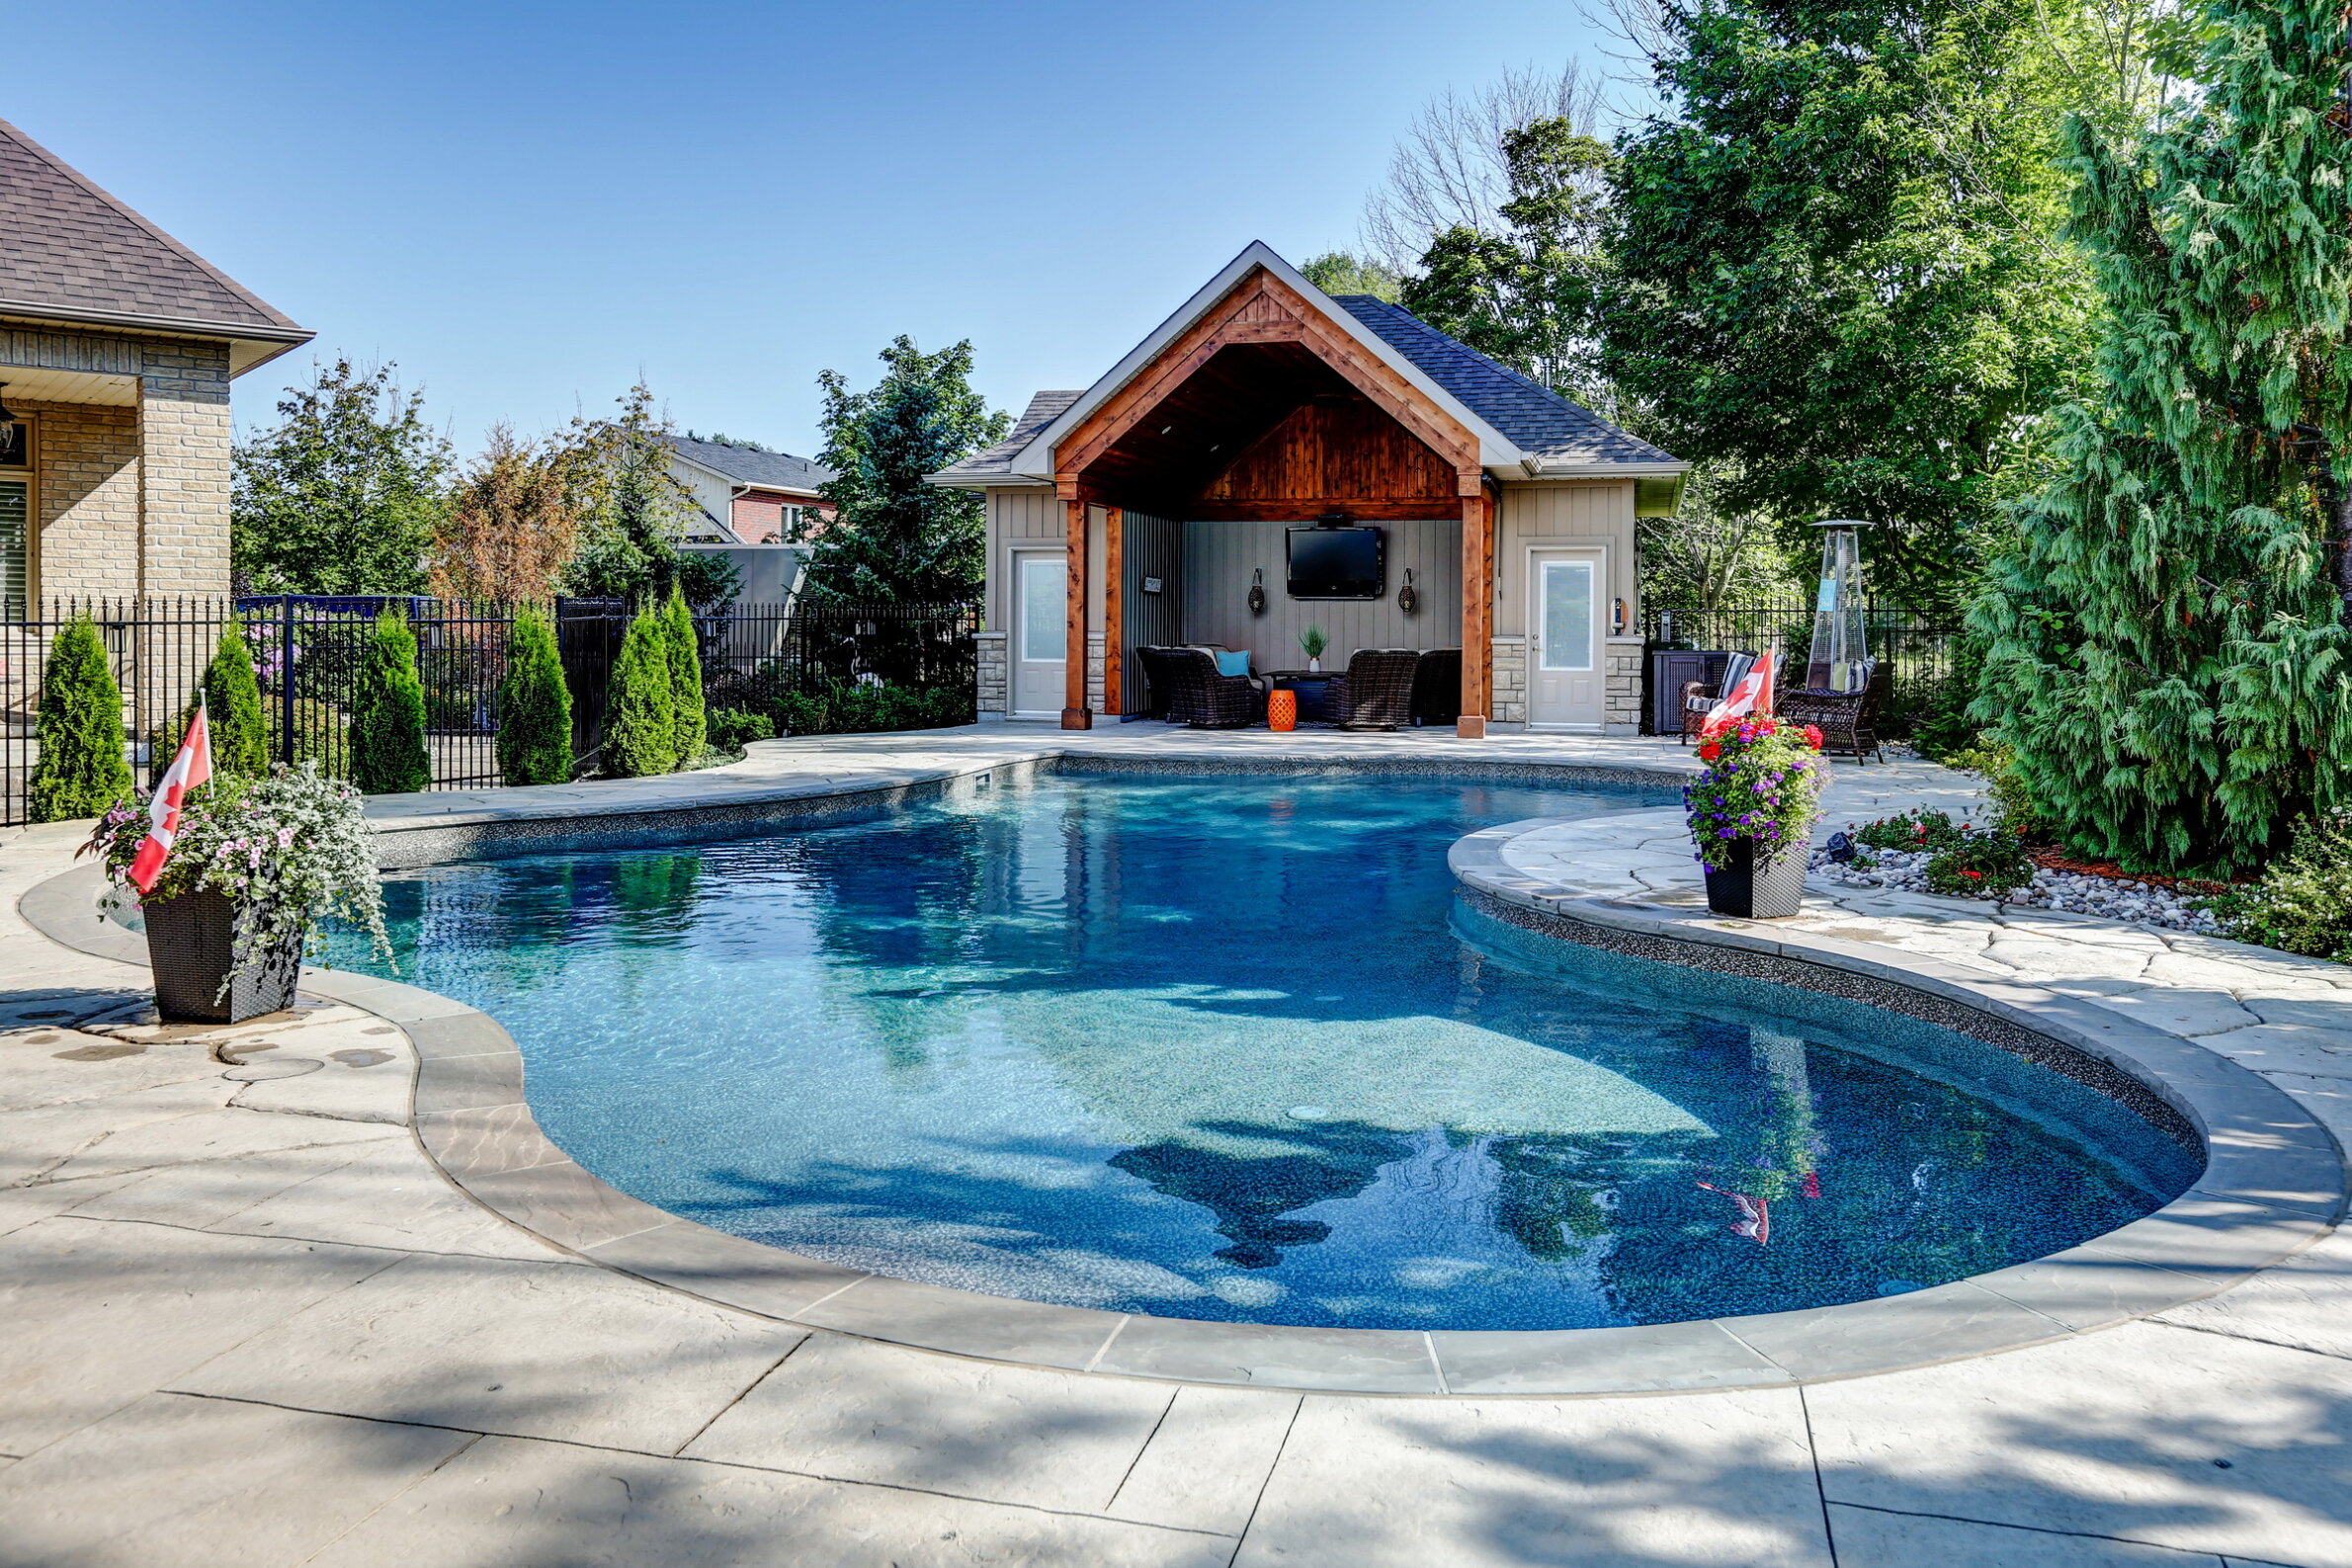 The image shows a backyard with a kidney-shaped inground pool, a pool house, landscaped garden, flag display, and a clear blue sky.